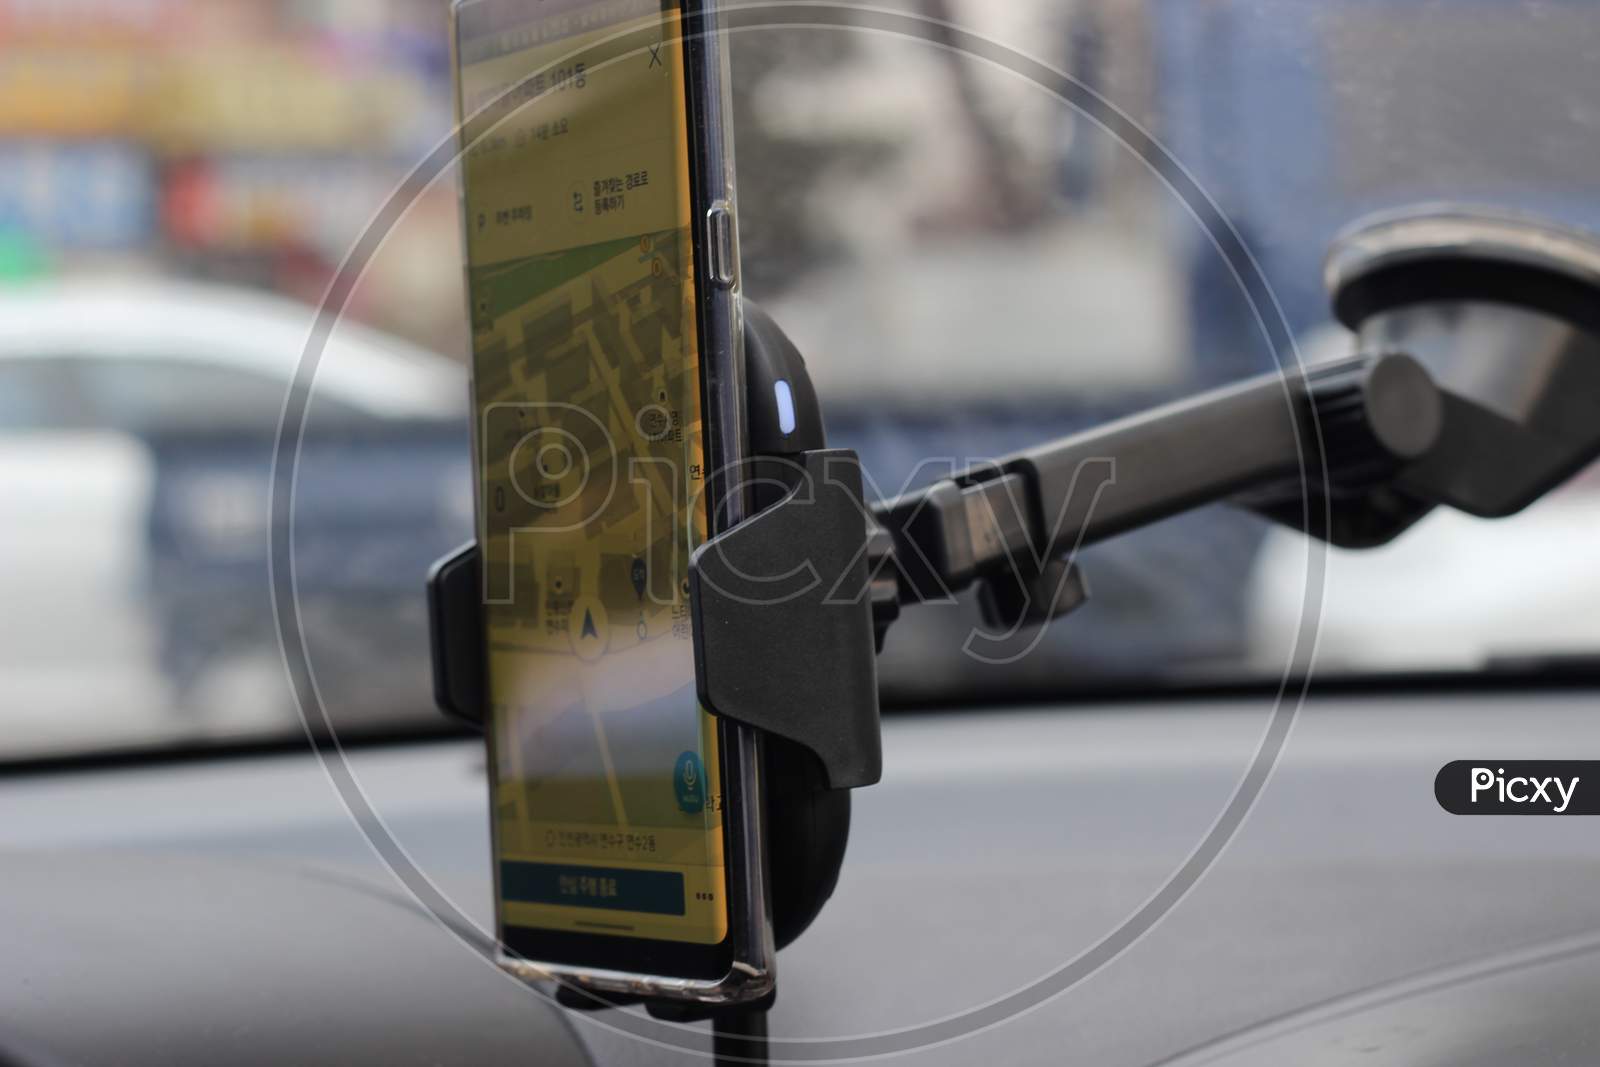 Smart Phone Holder Attached To Windscreen Of Car